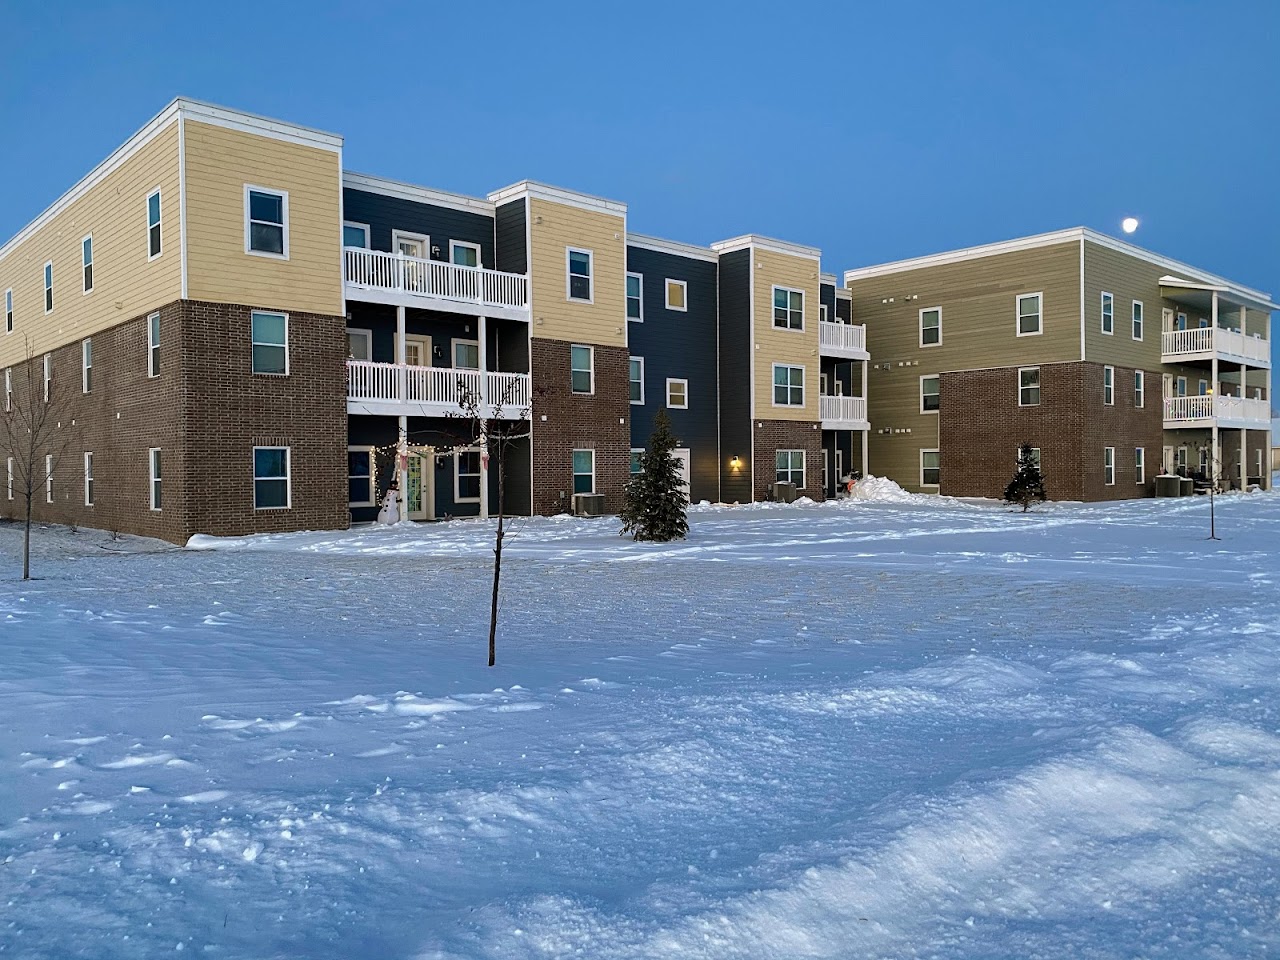 Photo of CROFT PLACE. Affordable housing located at 233 CROFT STREET NEW RICHMOND, WI 54017